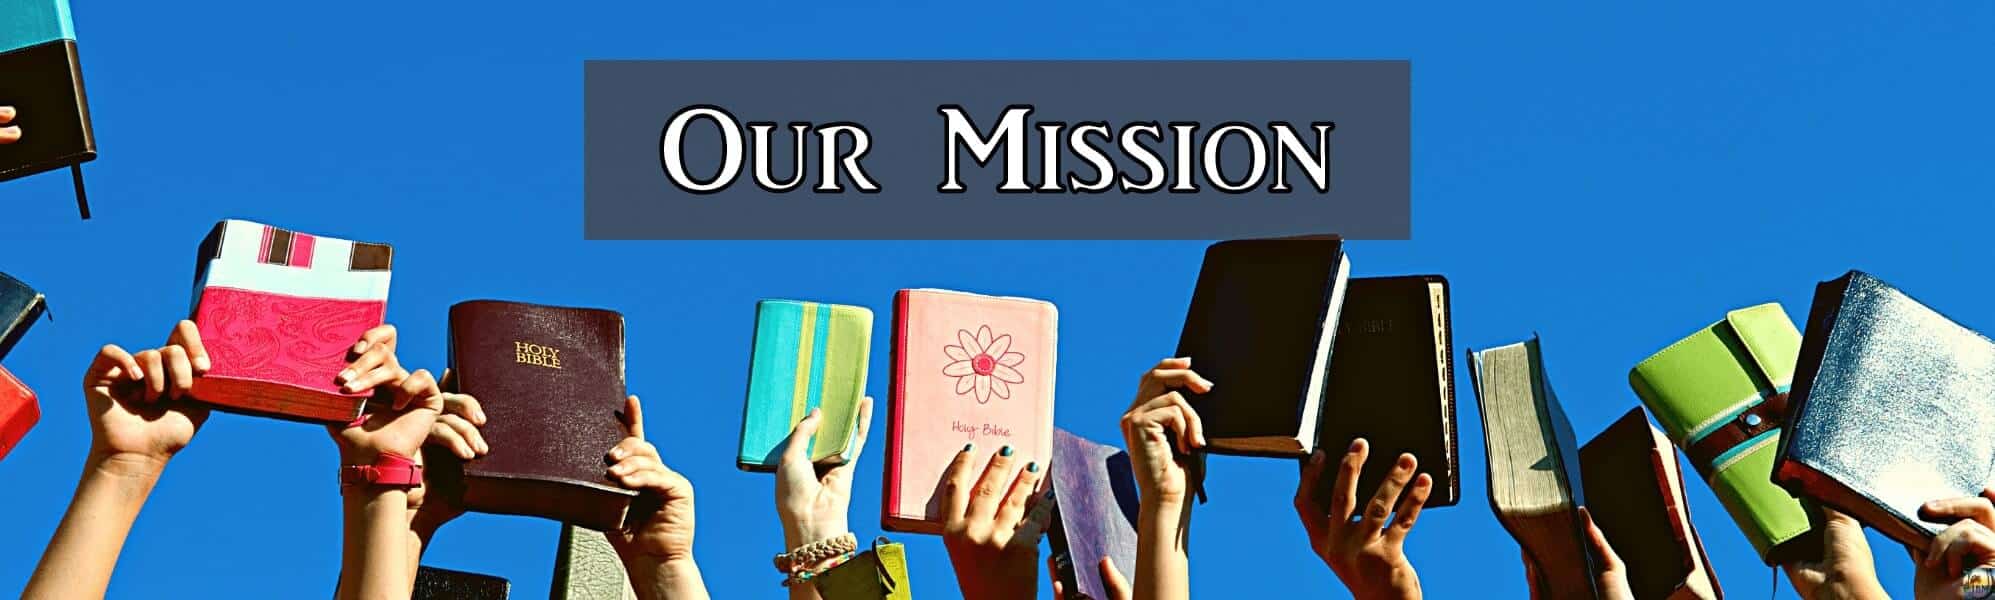 <span class="dojodigital_toggle_title">Our Mission</span>